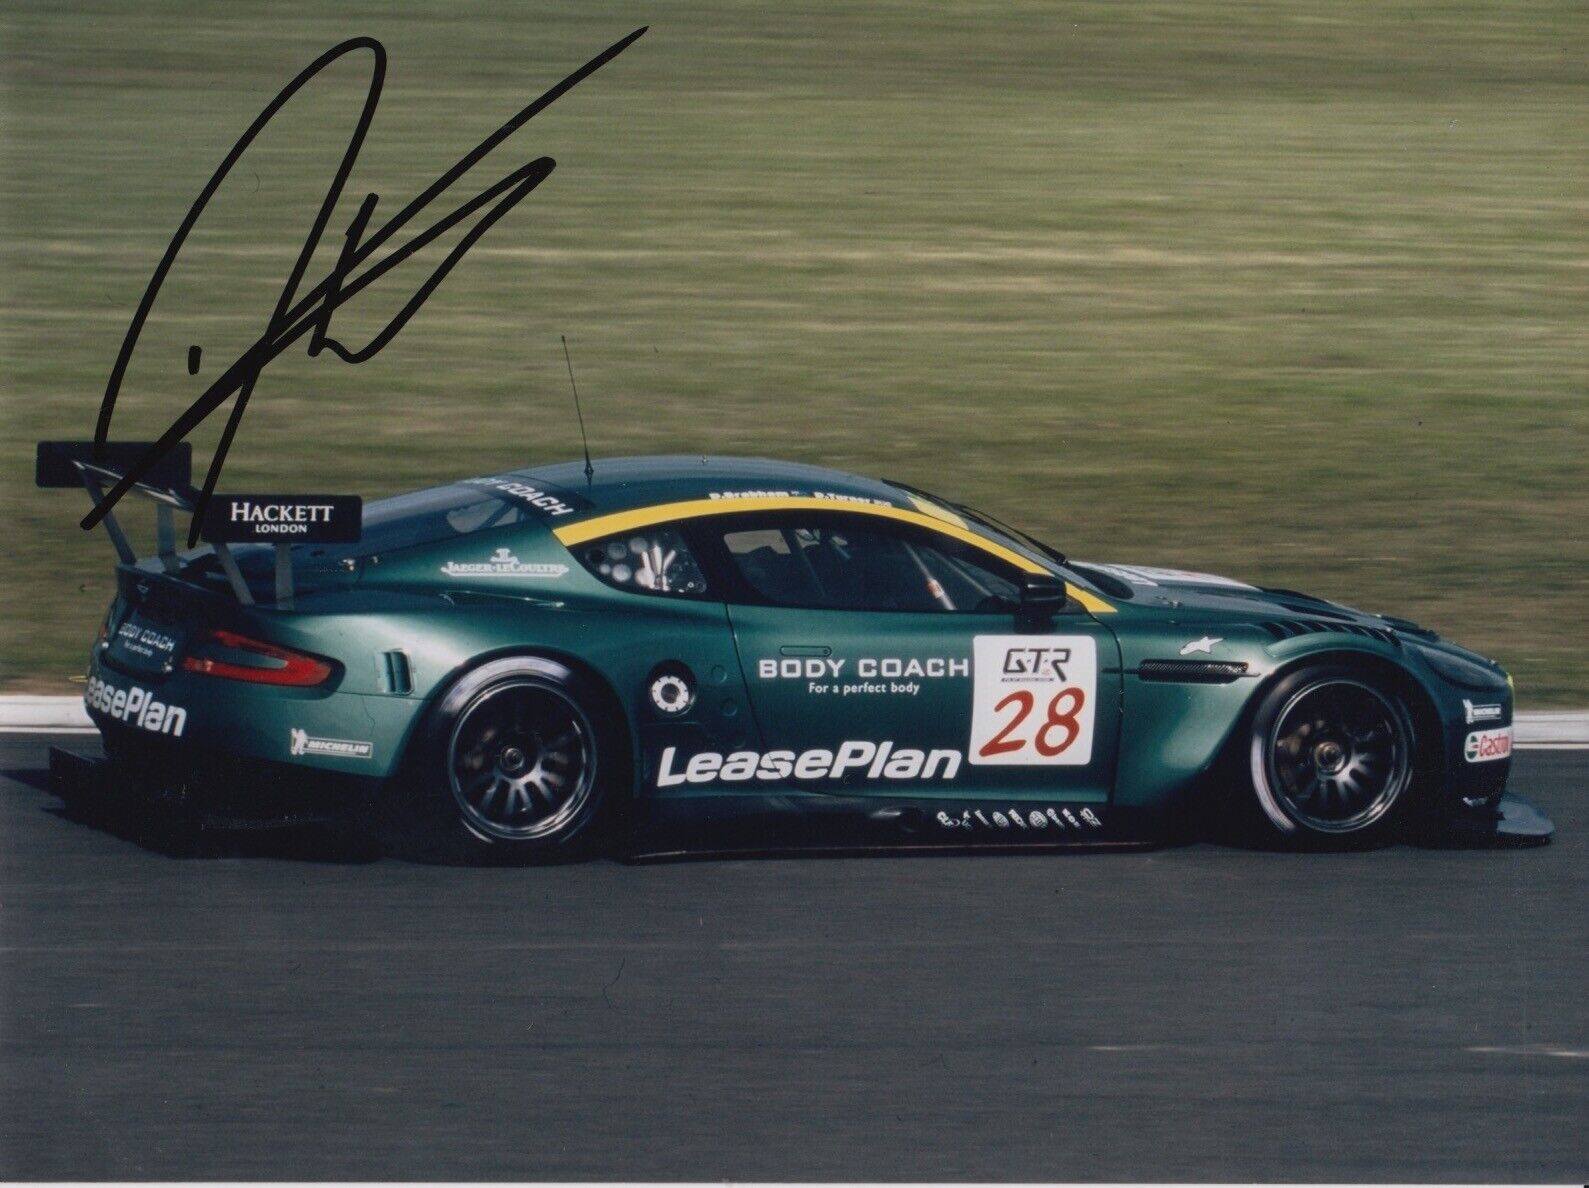 Darren Turner Hand Signed 8x6 Photo Poster painting - Le Mans Autograph.